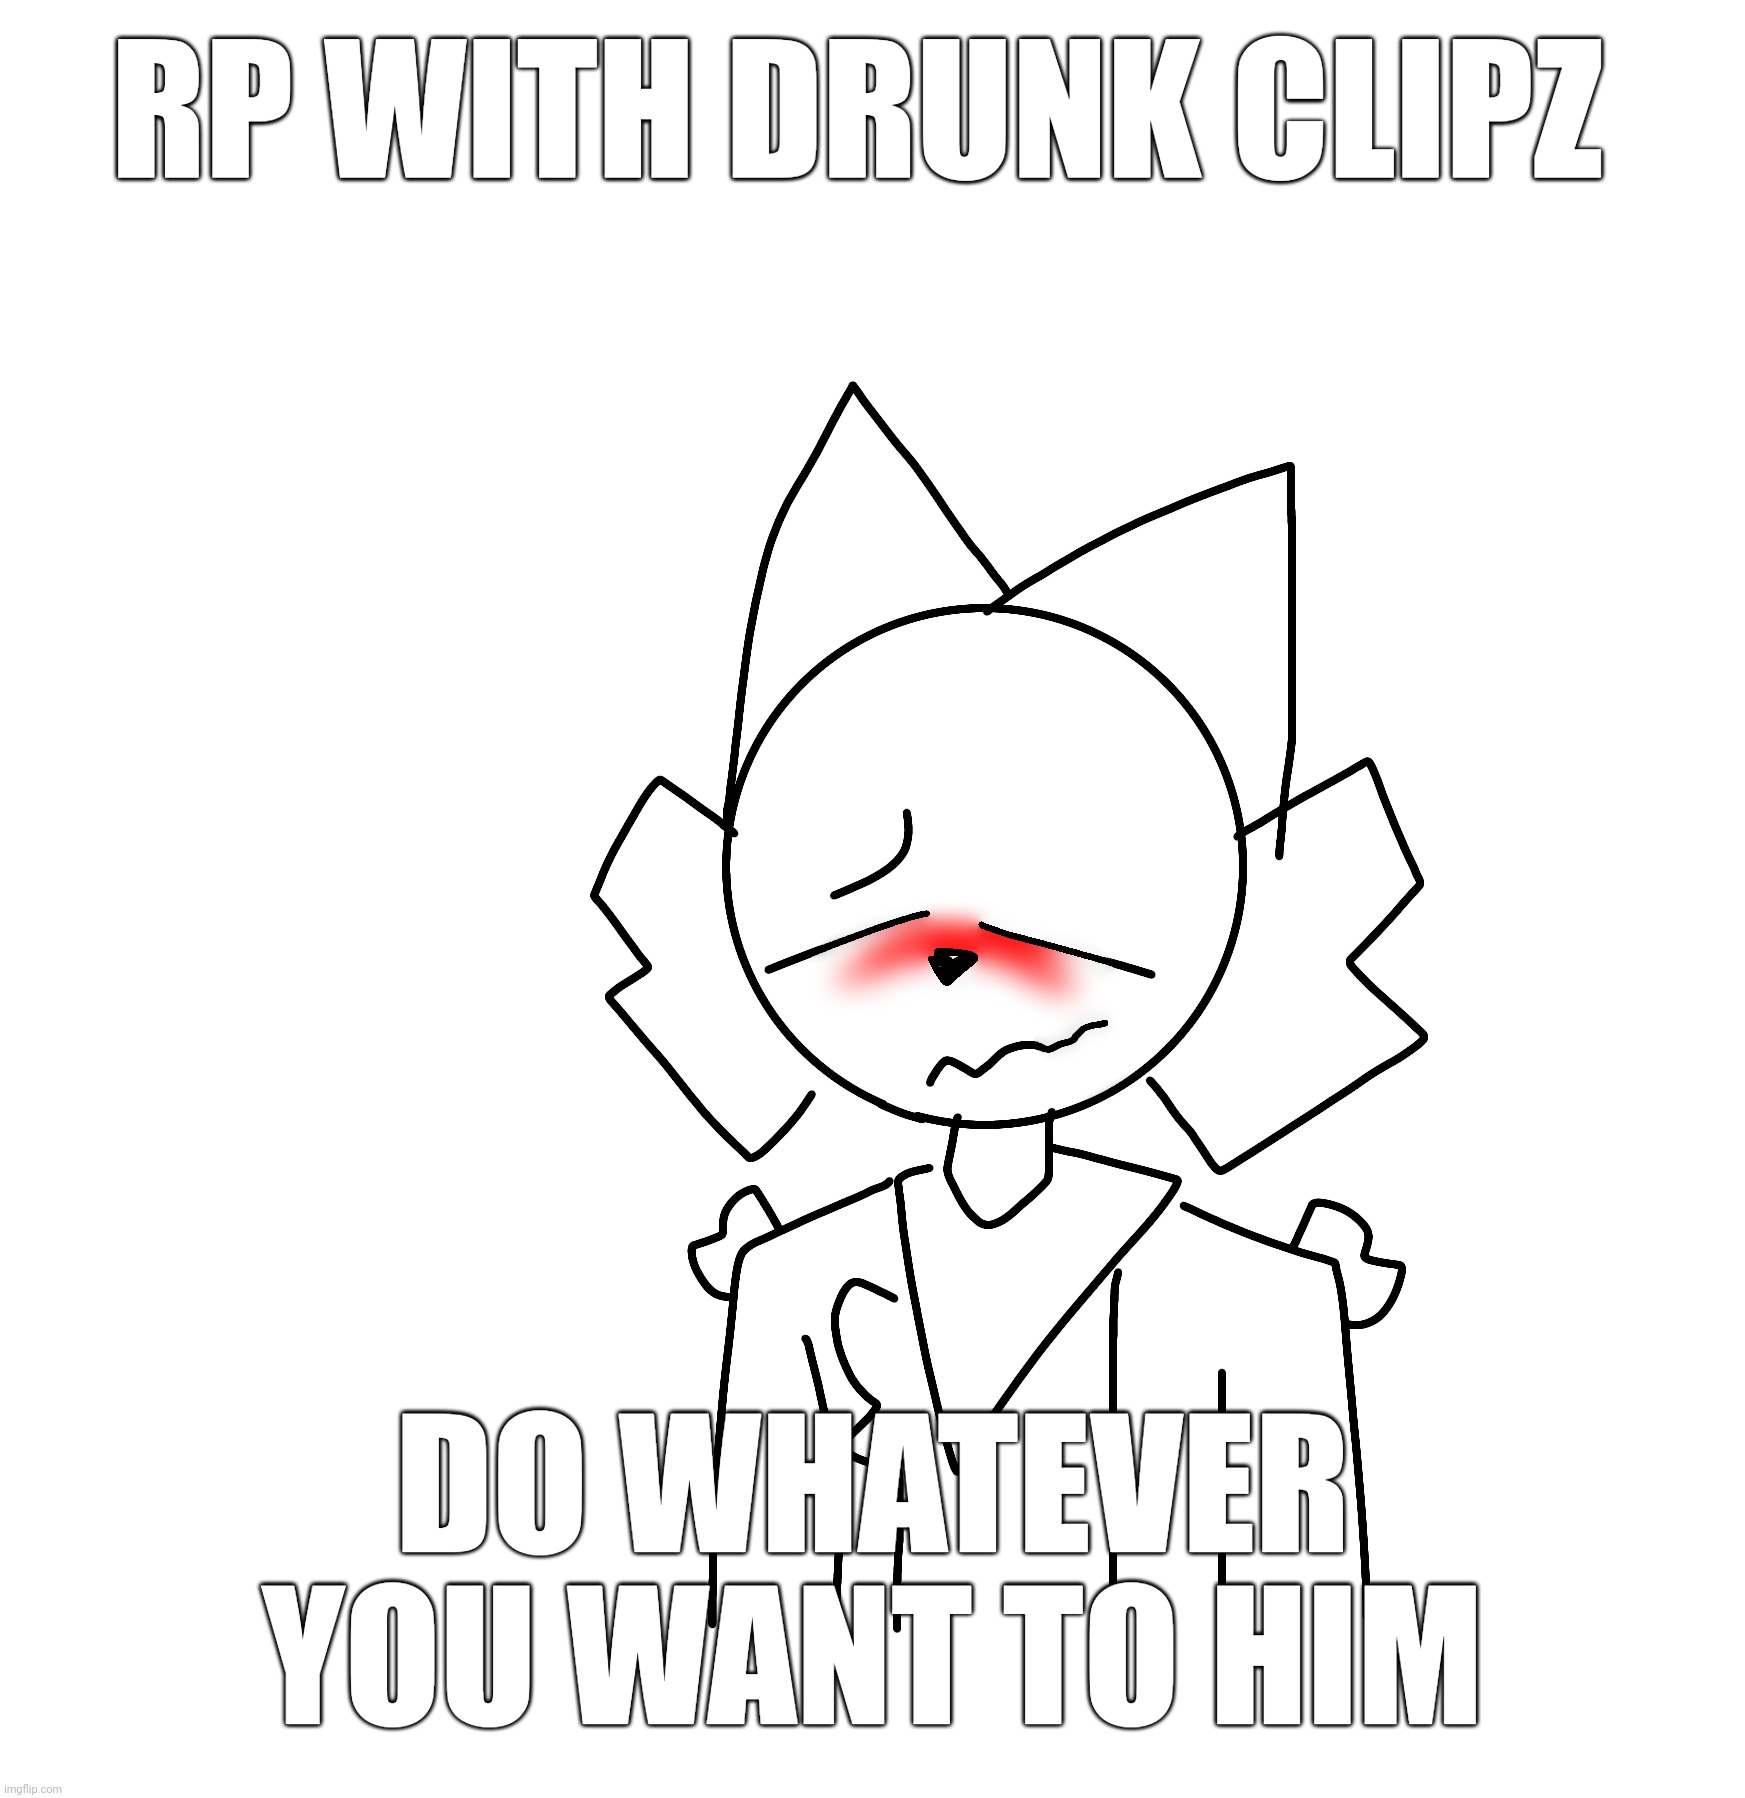 RP with drunk clipz | RP WITH DRUNK CLIPZ; DO WHATEVER YOU WANT TO HIM | made w/ Imgflip meme maker